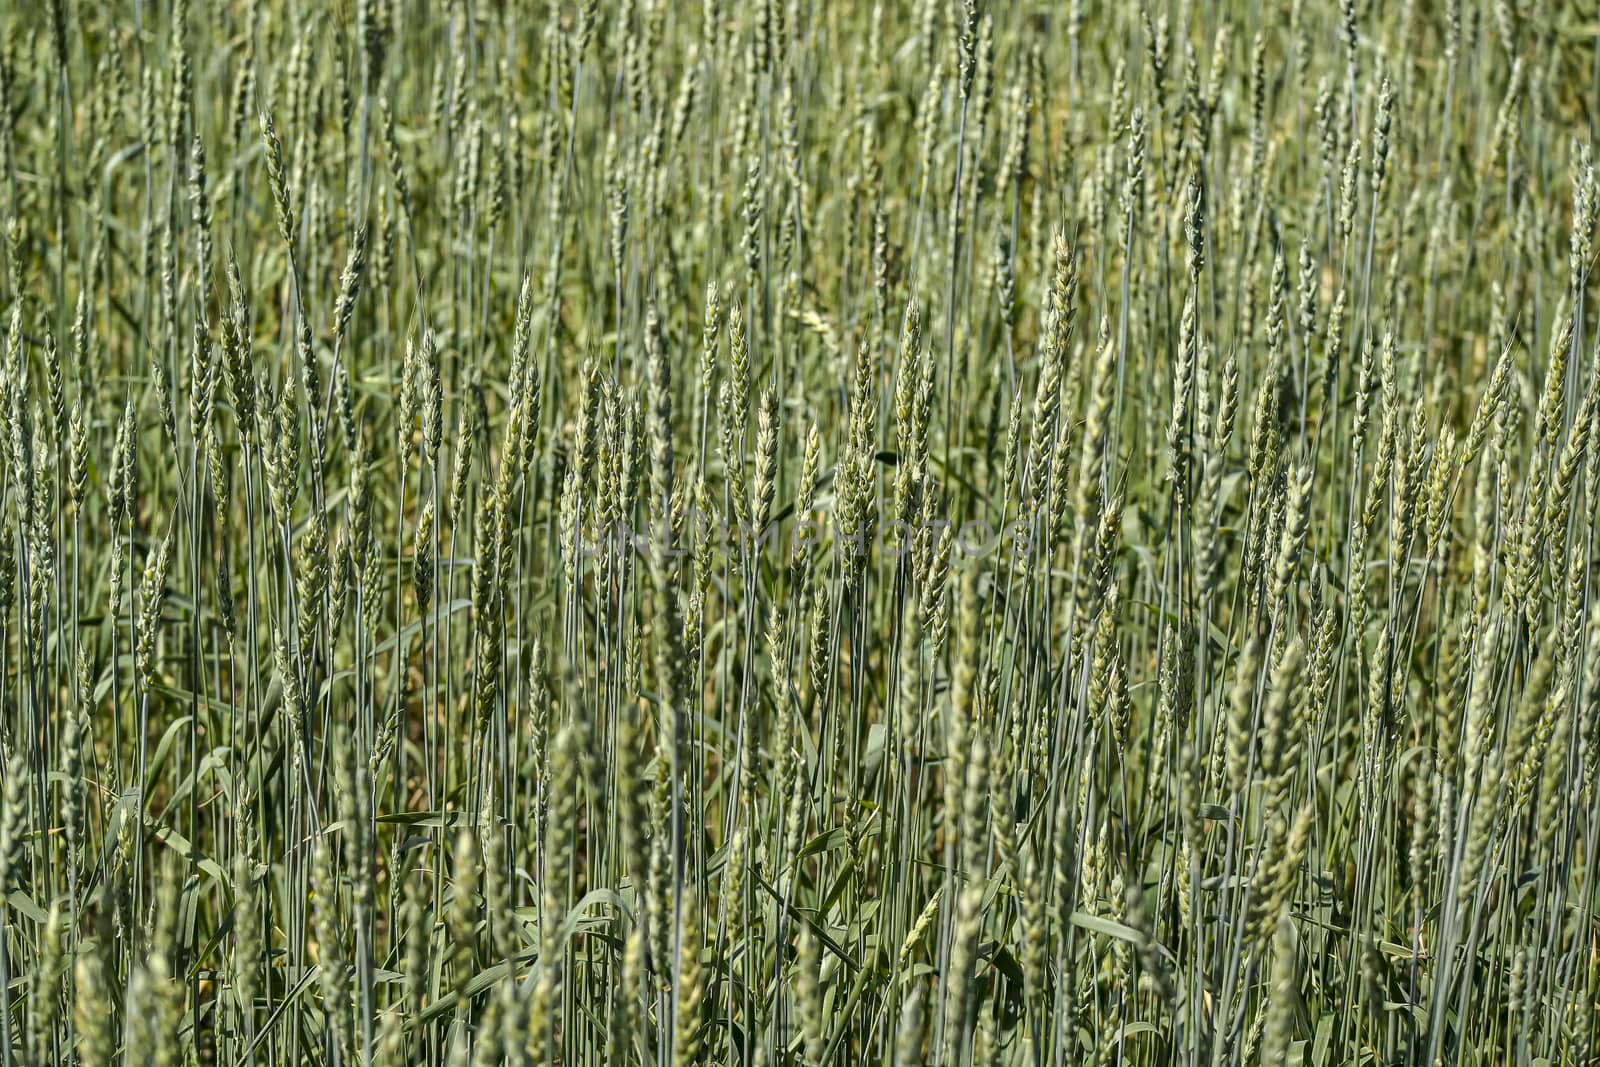 Green wheat grows on the field.